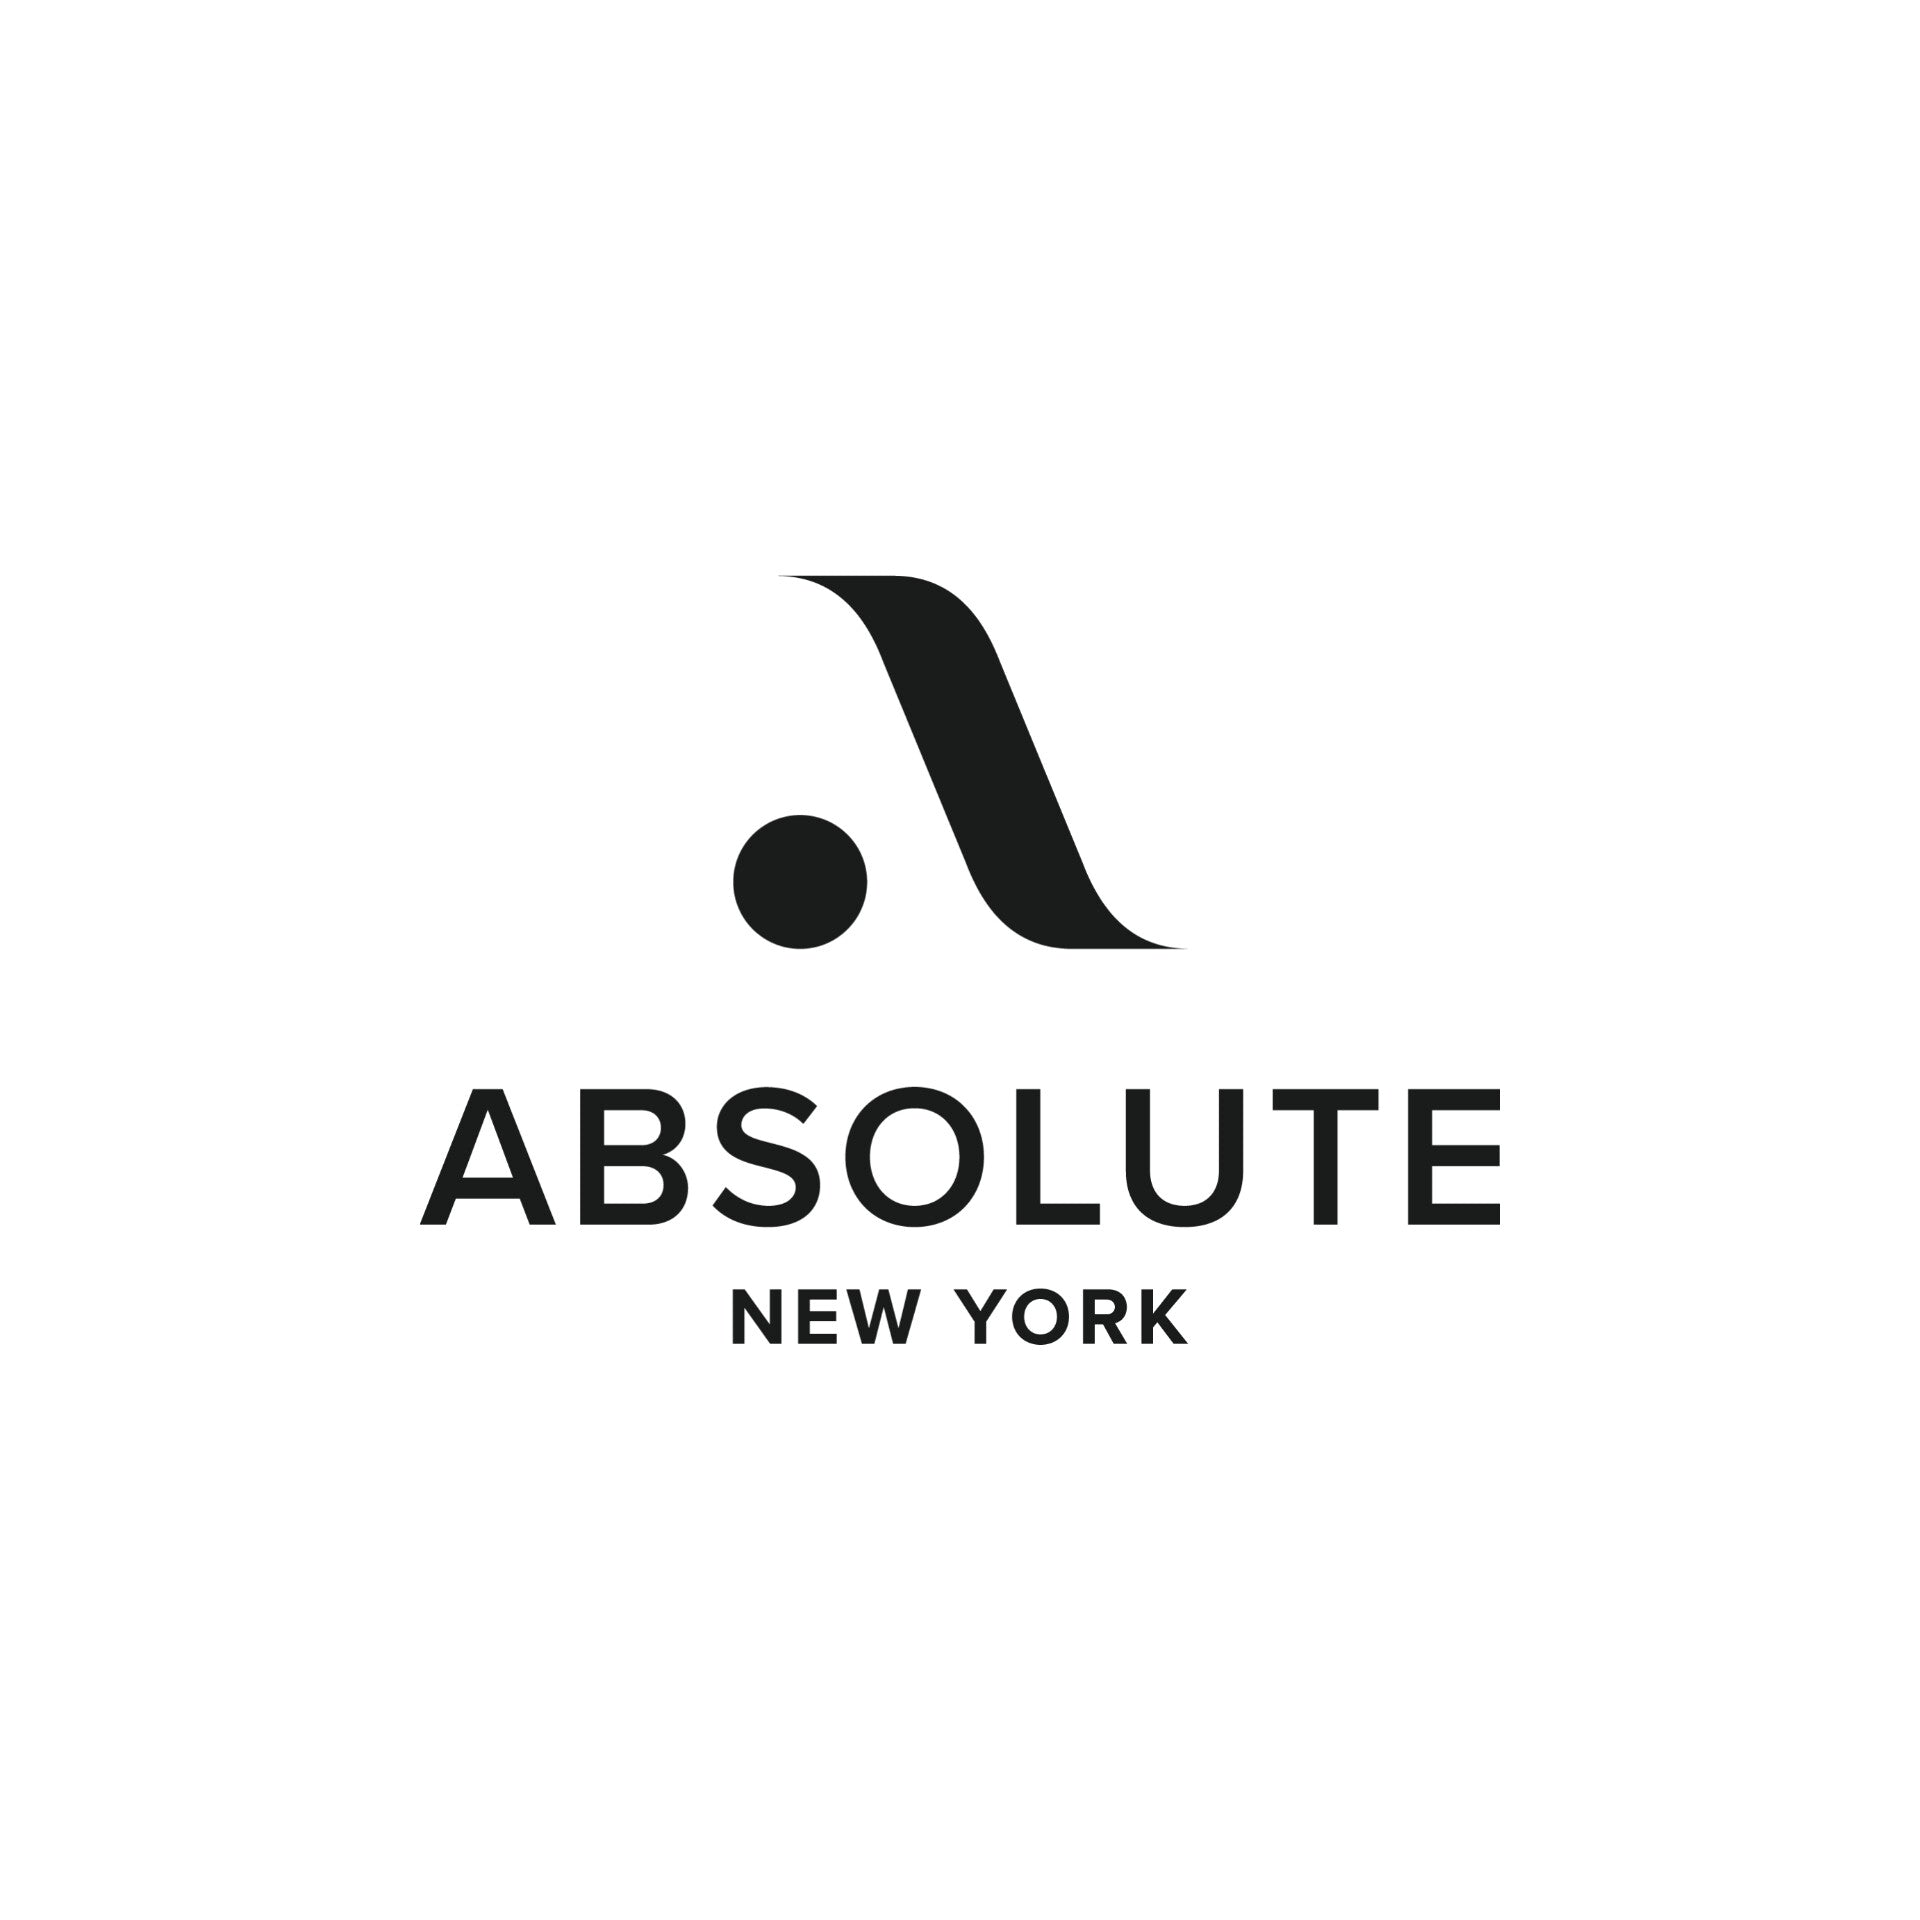 ABSOLUTE NEW YORK